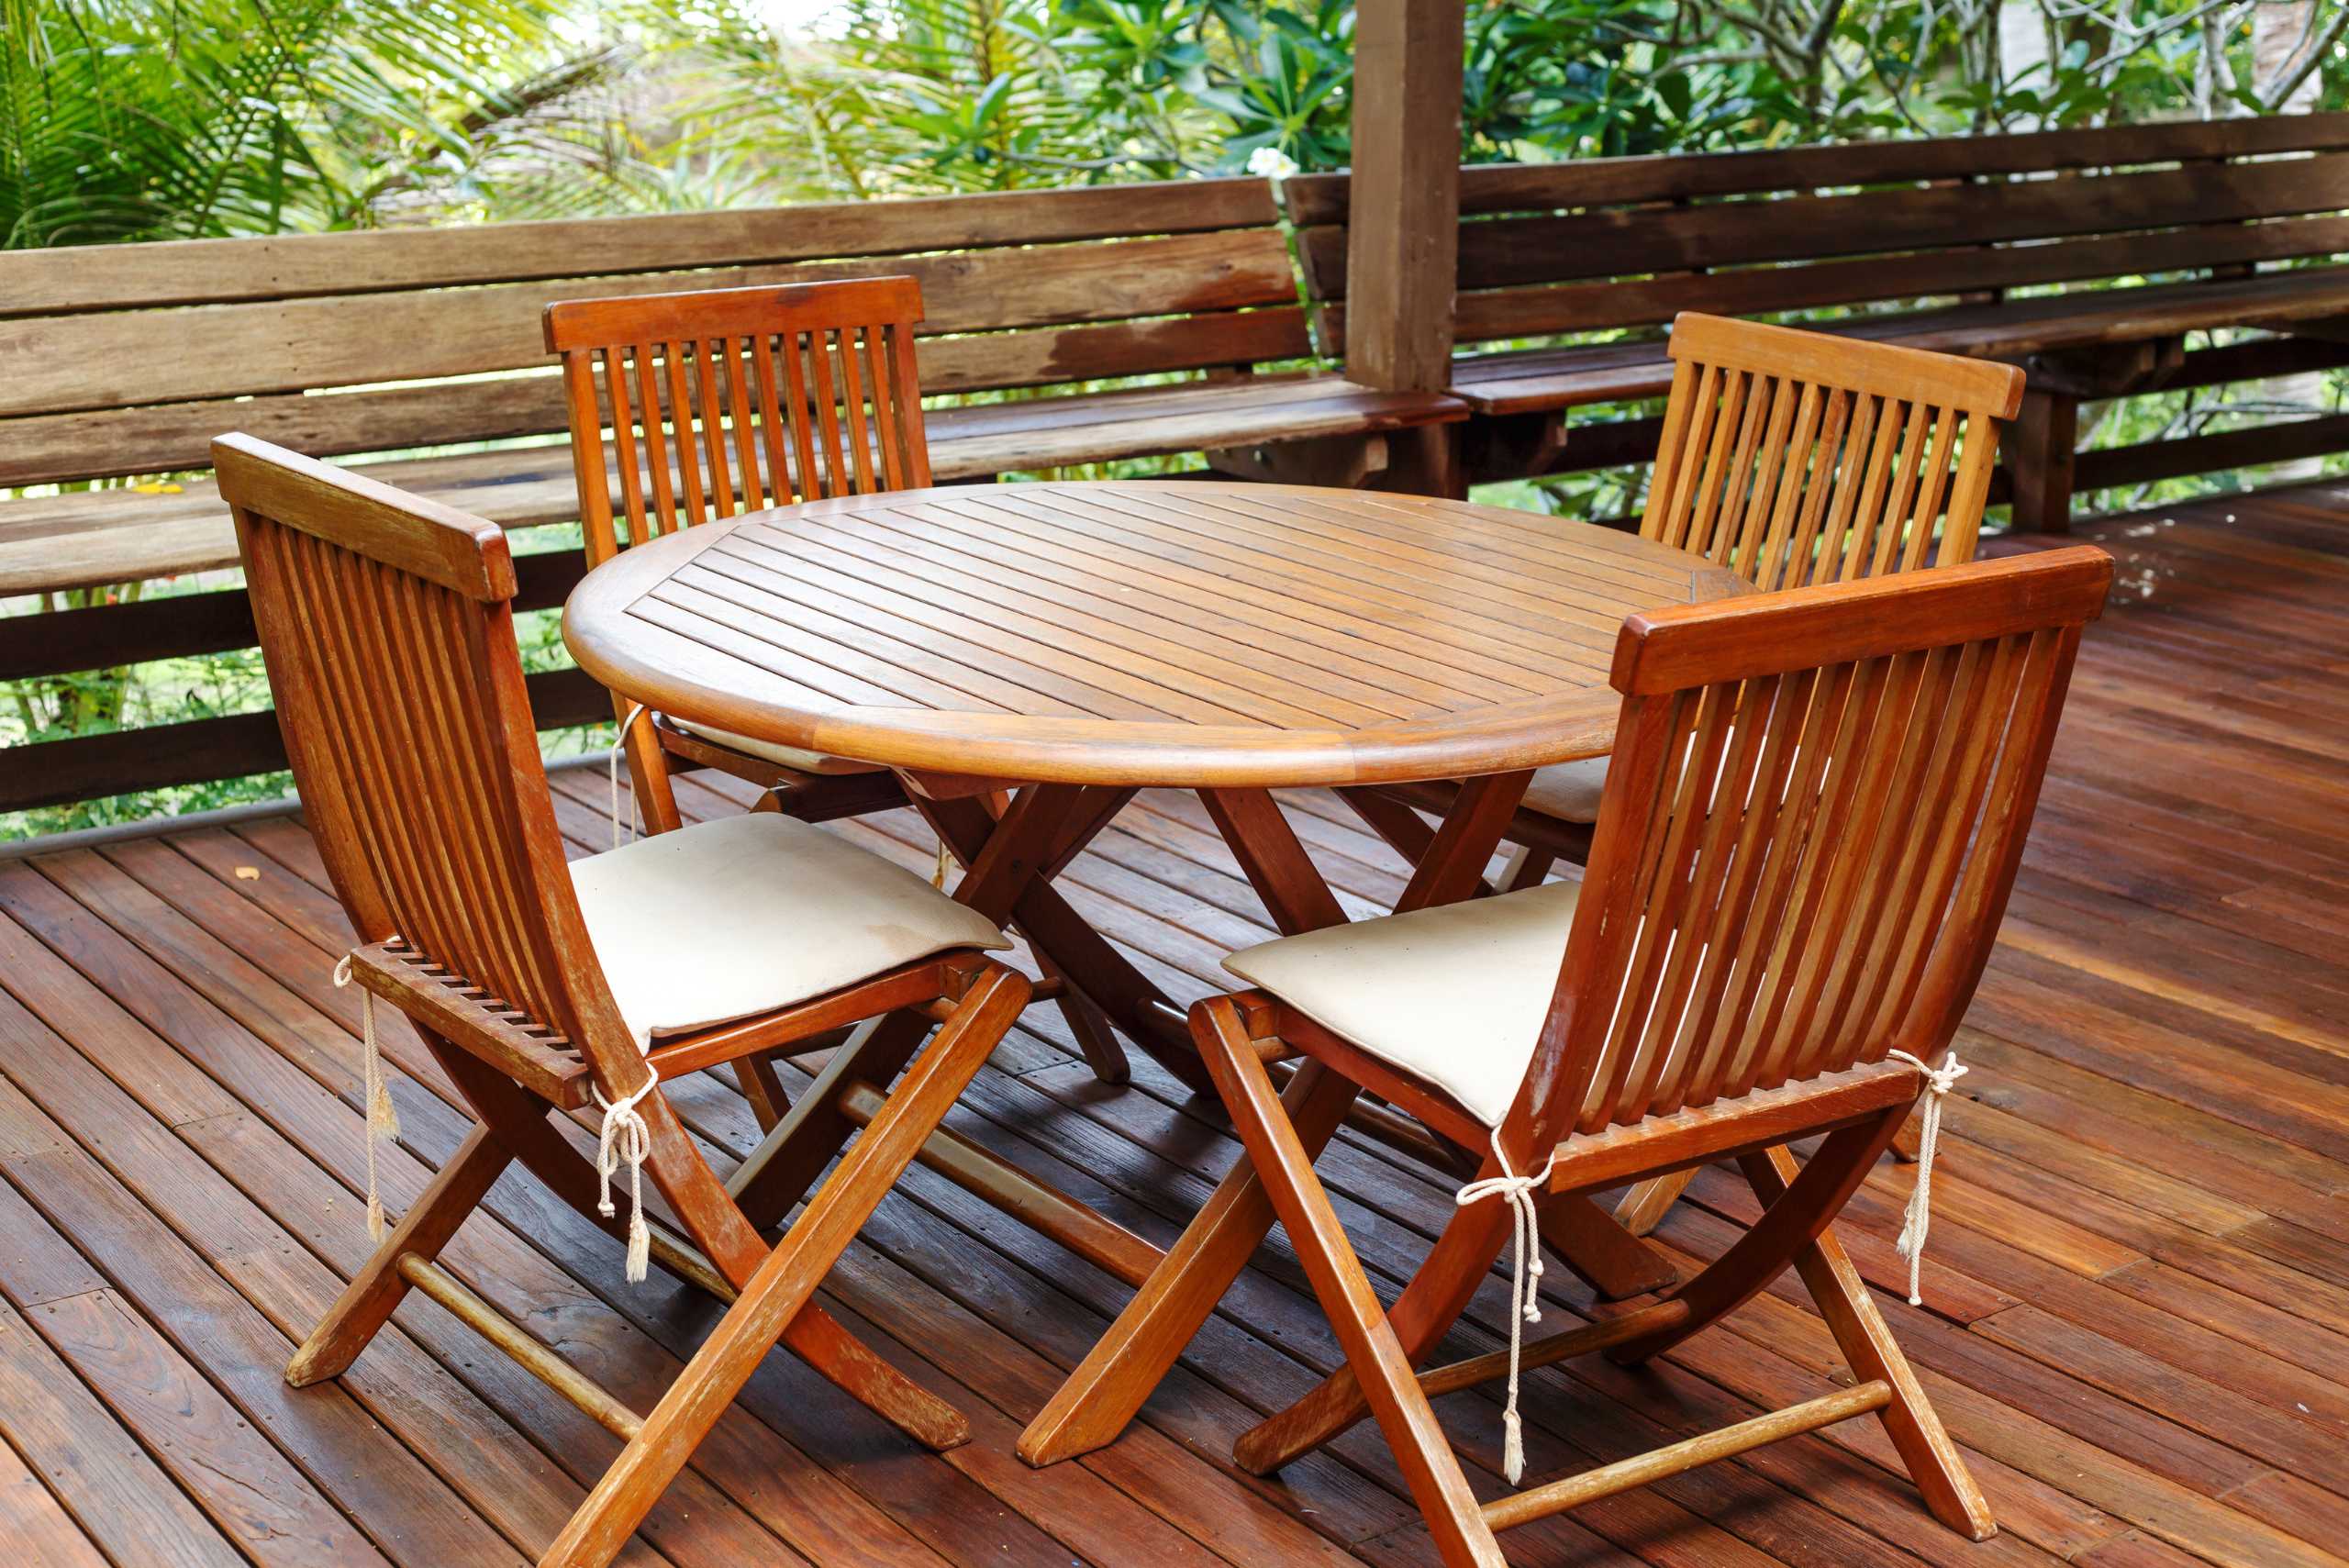 A patio with table and four chairs made of wood and have seat cushions.